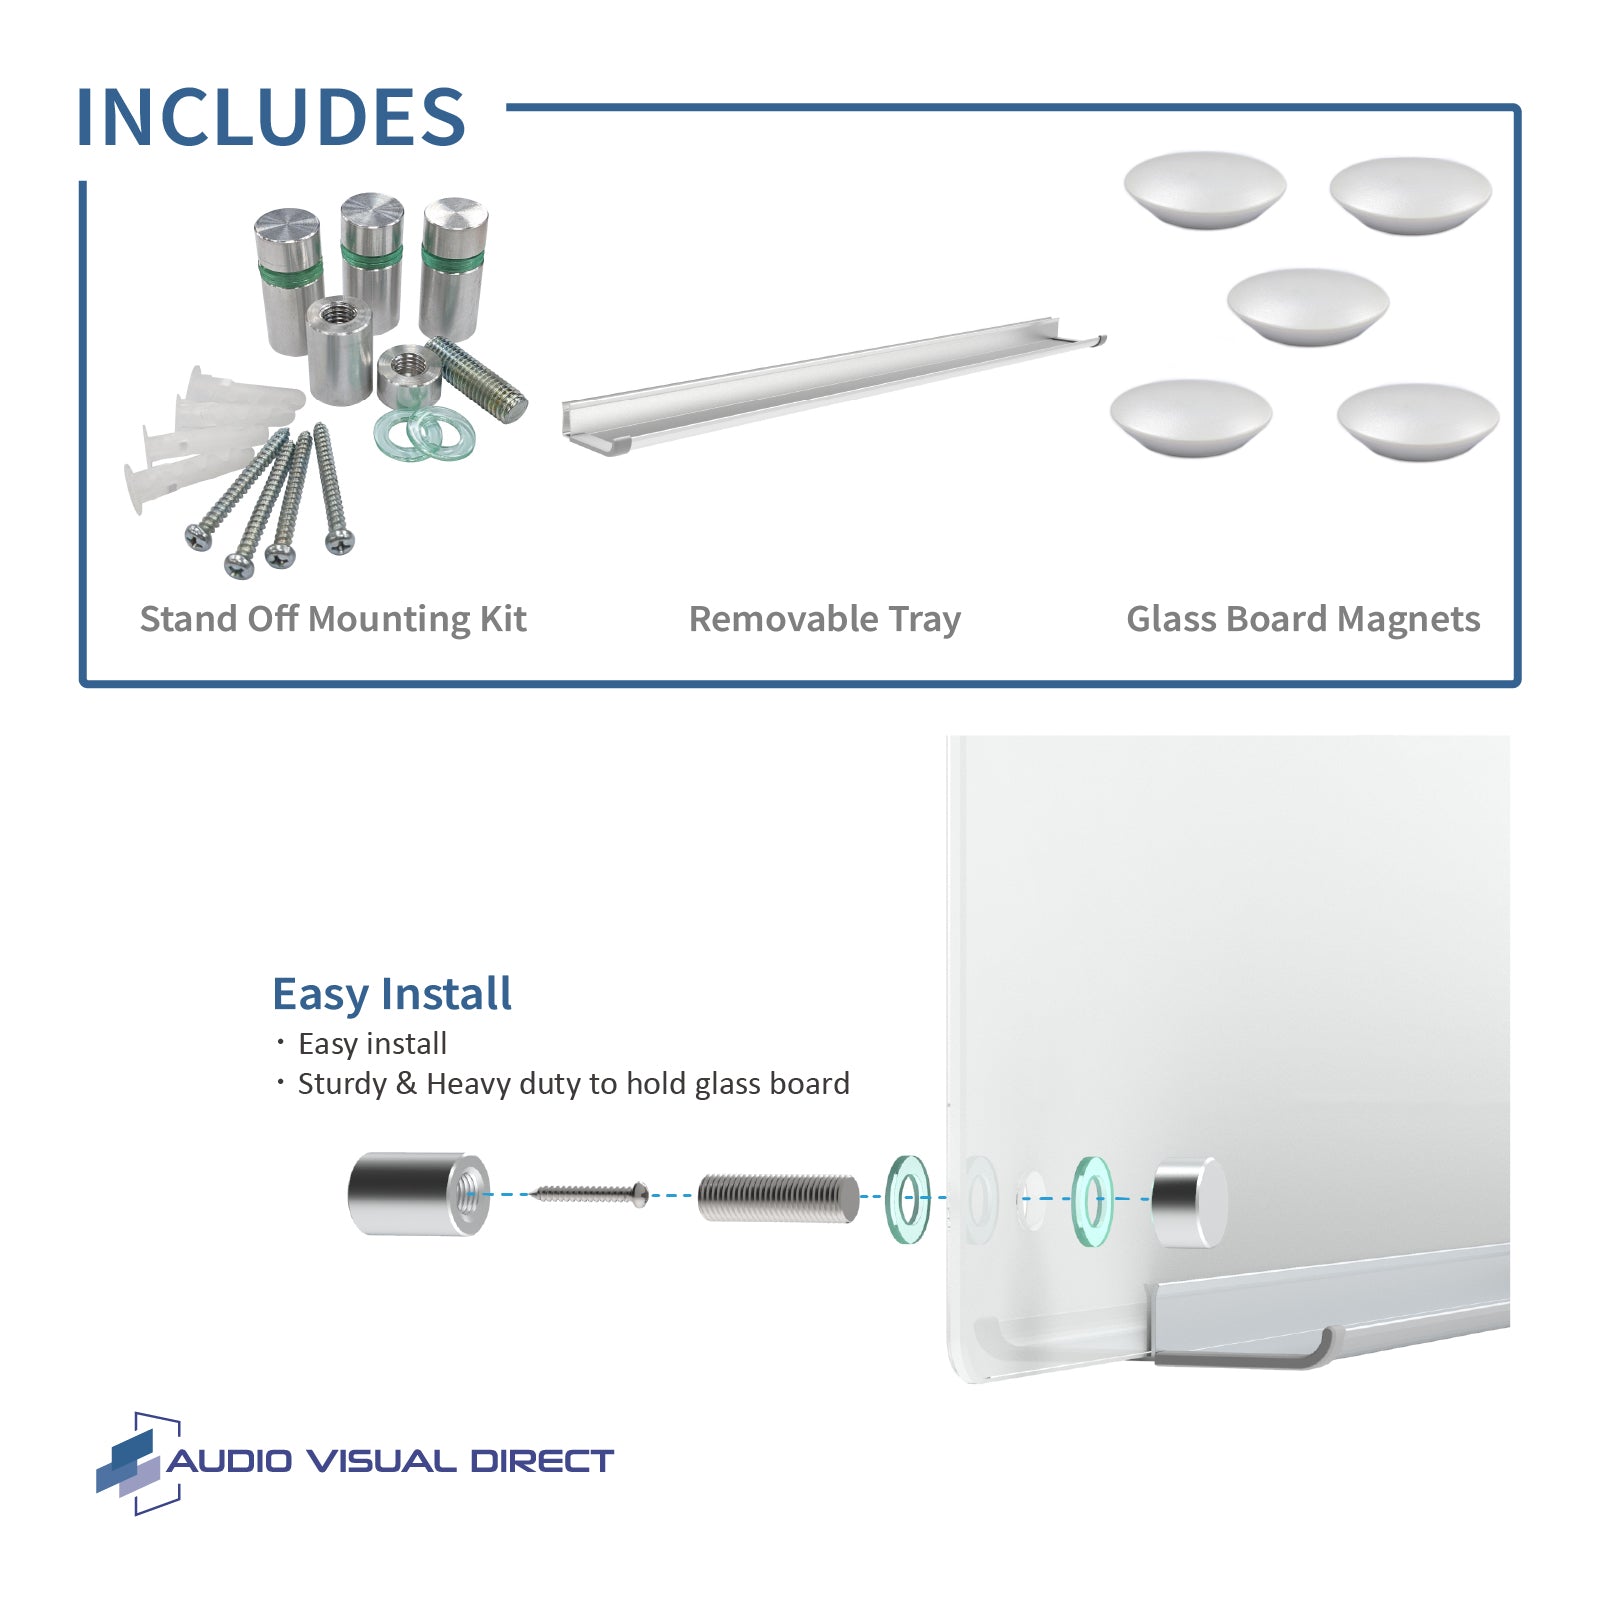 Audio-Visual Direct White Glass Board For Home & Office. Includes a stand off mounting kit, removable marker tray, and glass board magnets. It is easy to install & heavy duty.